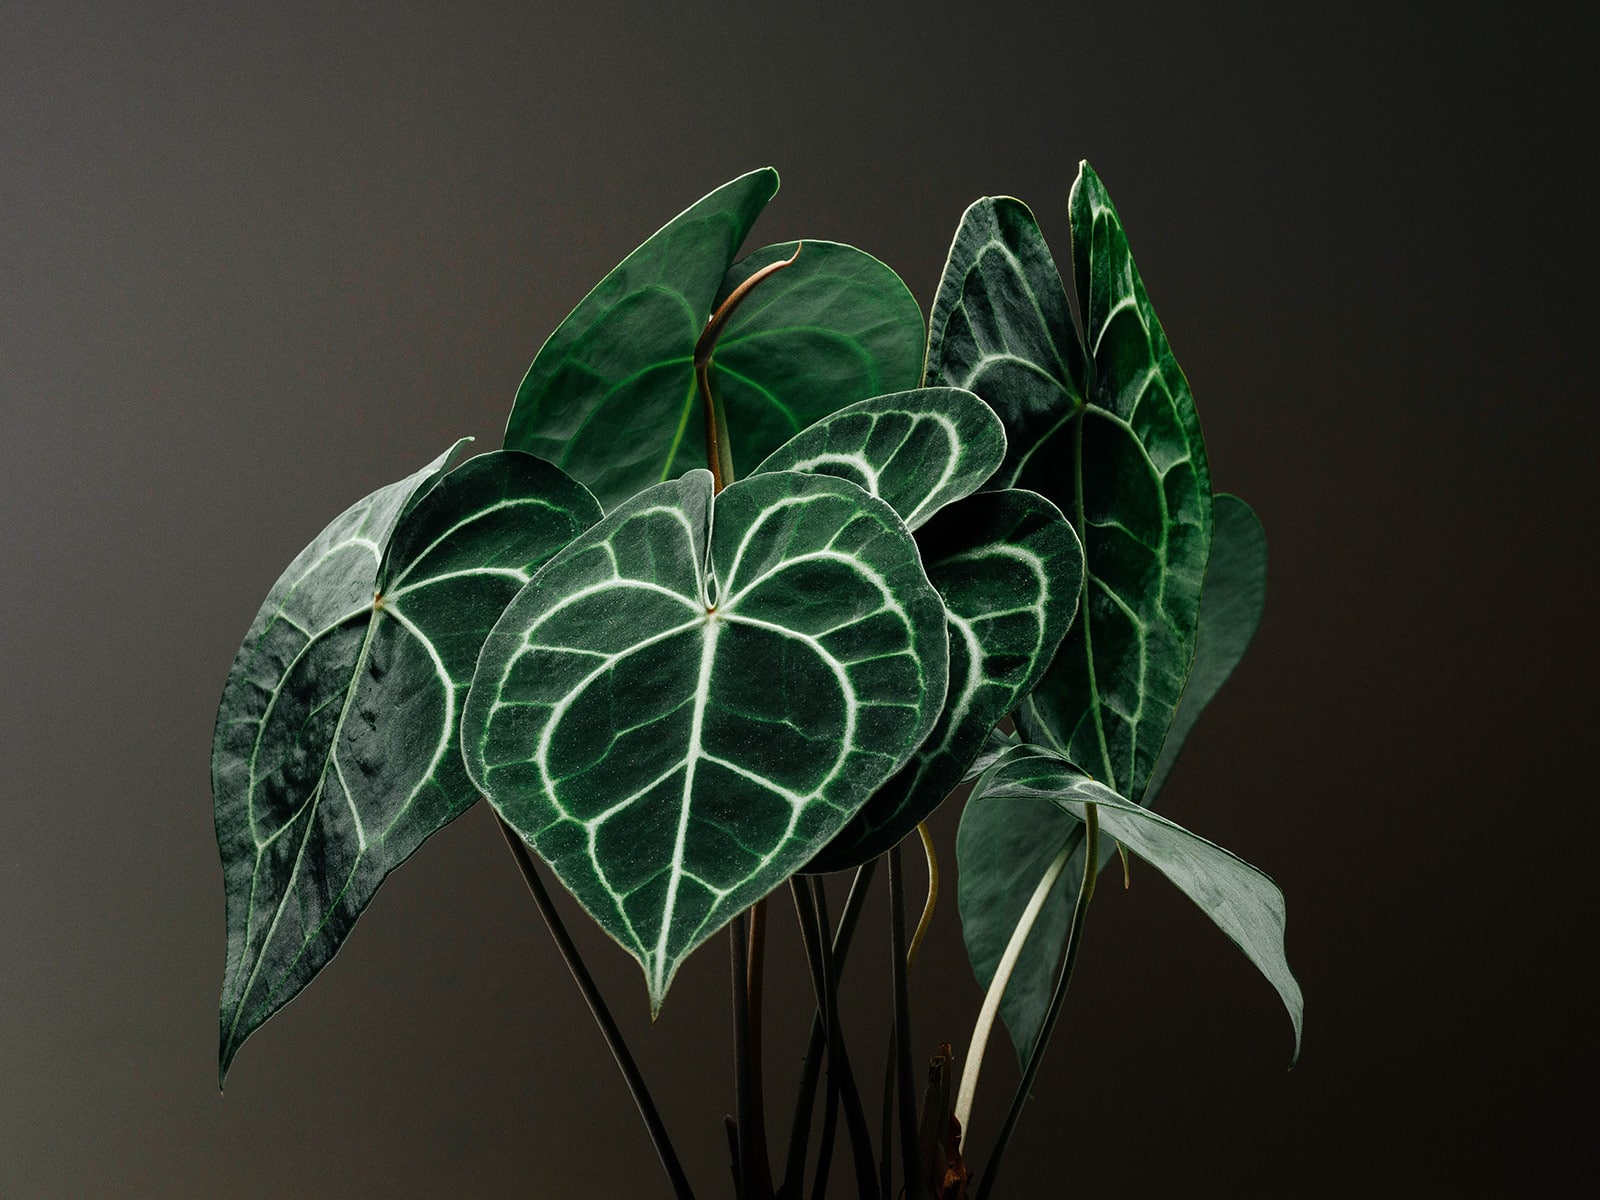 Minimalist moody shot of Anthurium clarinervium stems and leaves against a black background